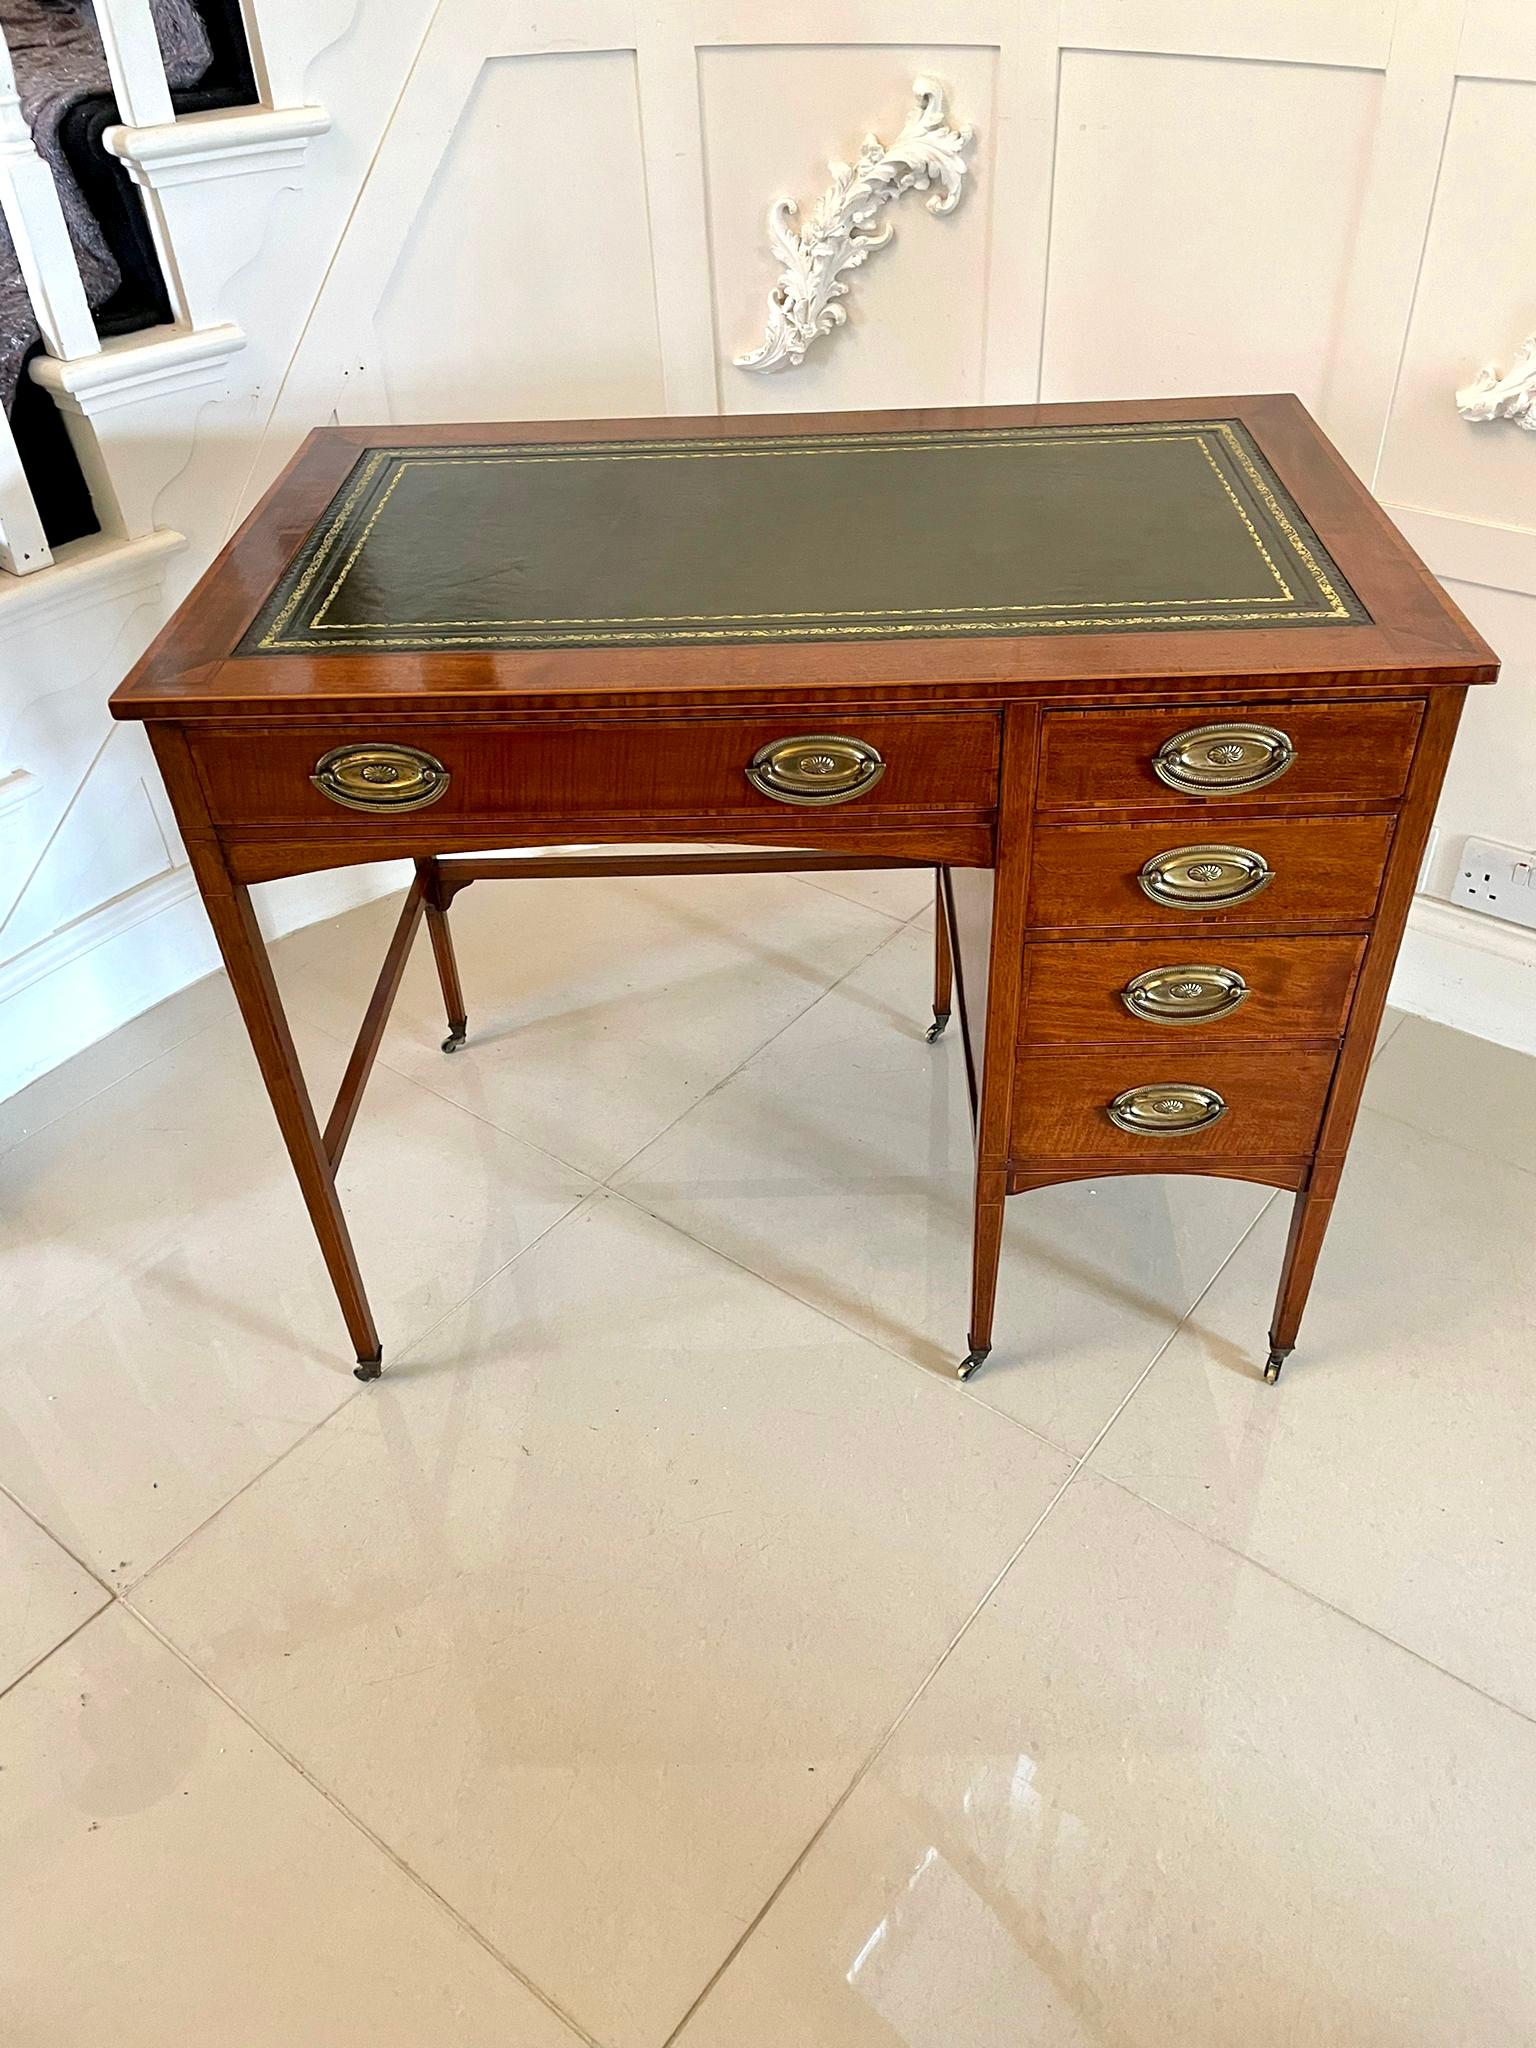 Antique Edwardian quality freestanding mahogany inlaid pedestal desk having a quality attractive mahogany inlaid satinwood crossbanded top with a green leather writing surface above one long drawer and four smaller drawers crossbanded in satinwood